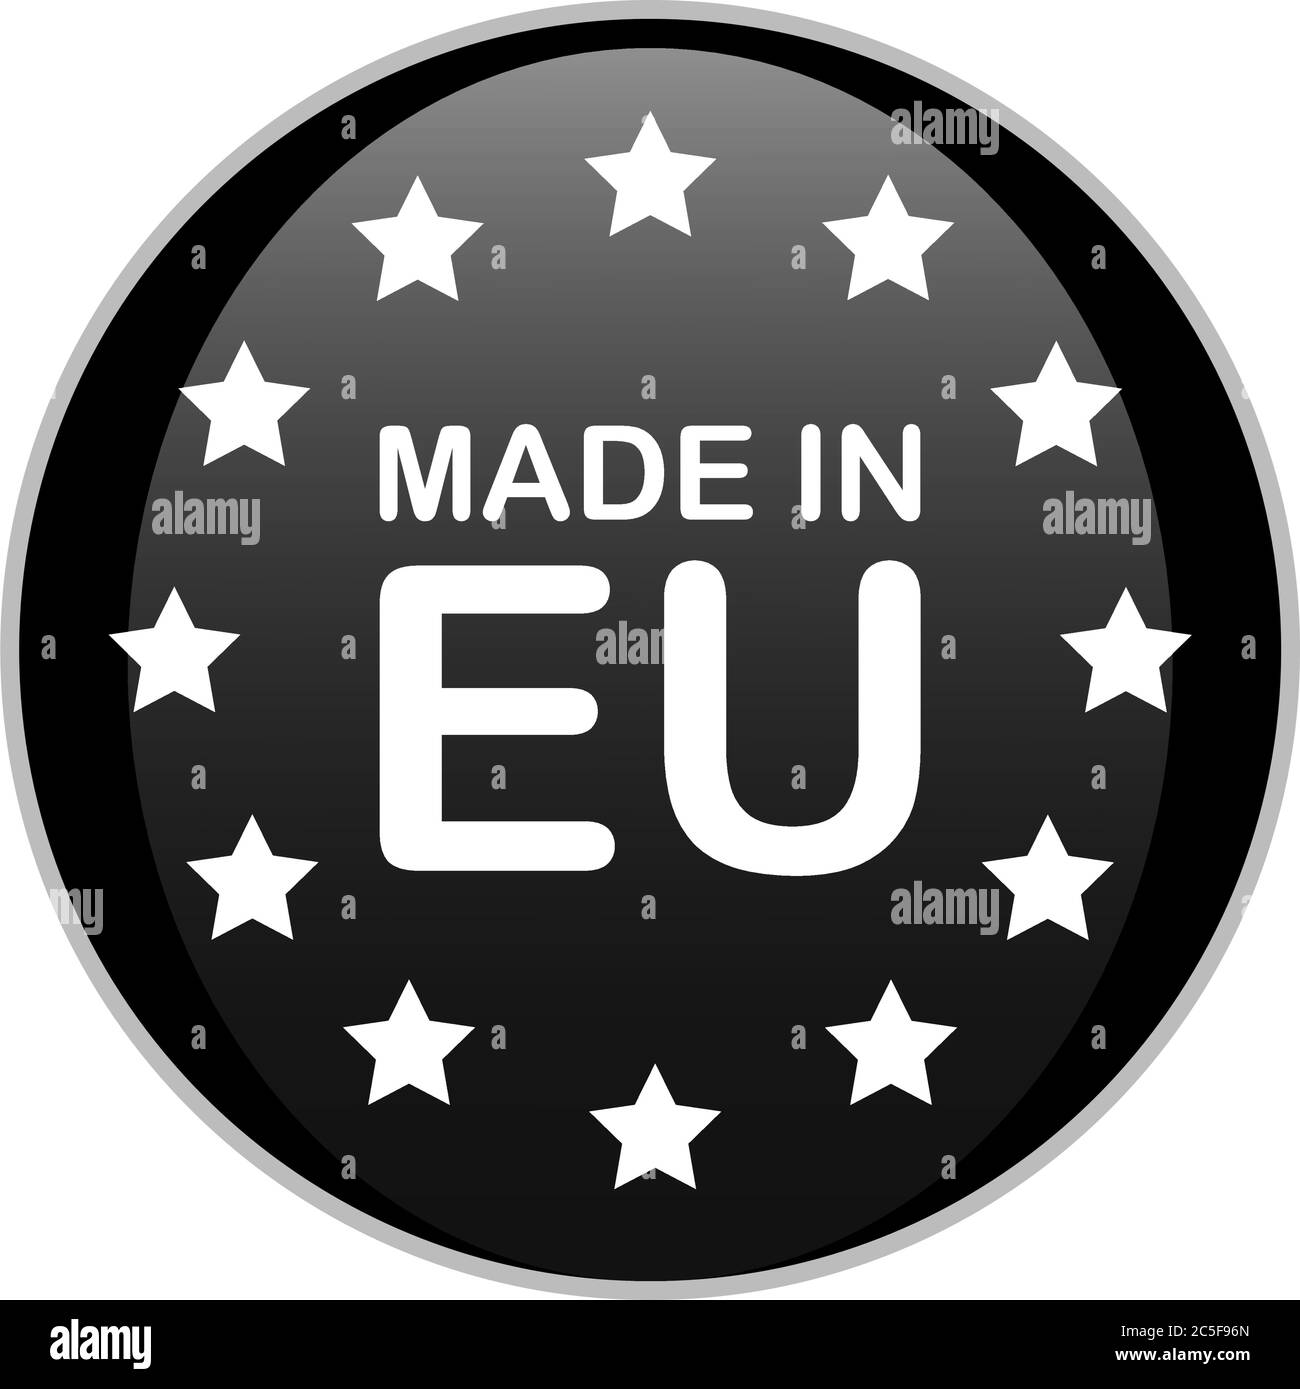 MADE IN EU black round badge with white text and stars. Europe product sign vector illustration isolated on white background. Stock Vector